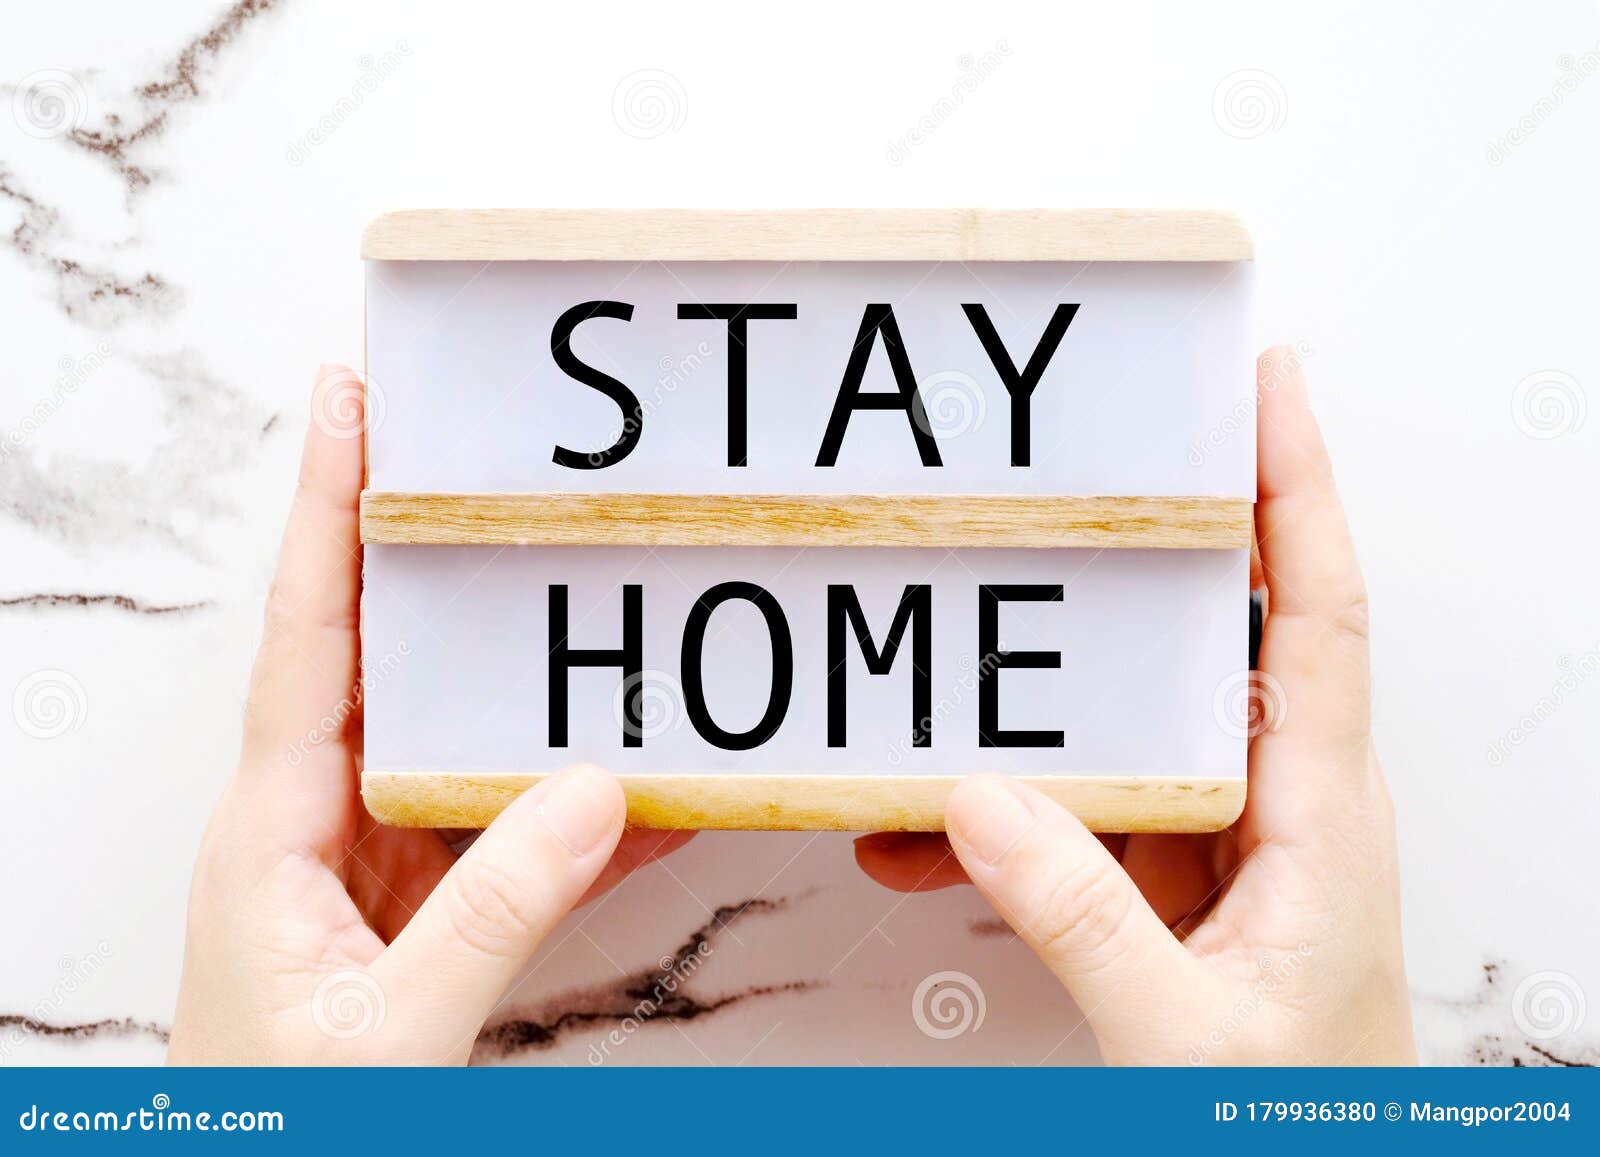 stay home campaign for coronavirus prevention, word on wooden box for the preventative measure to protect the infection of corona